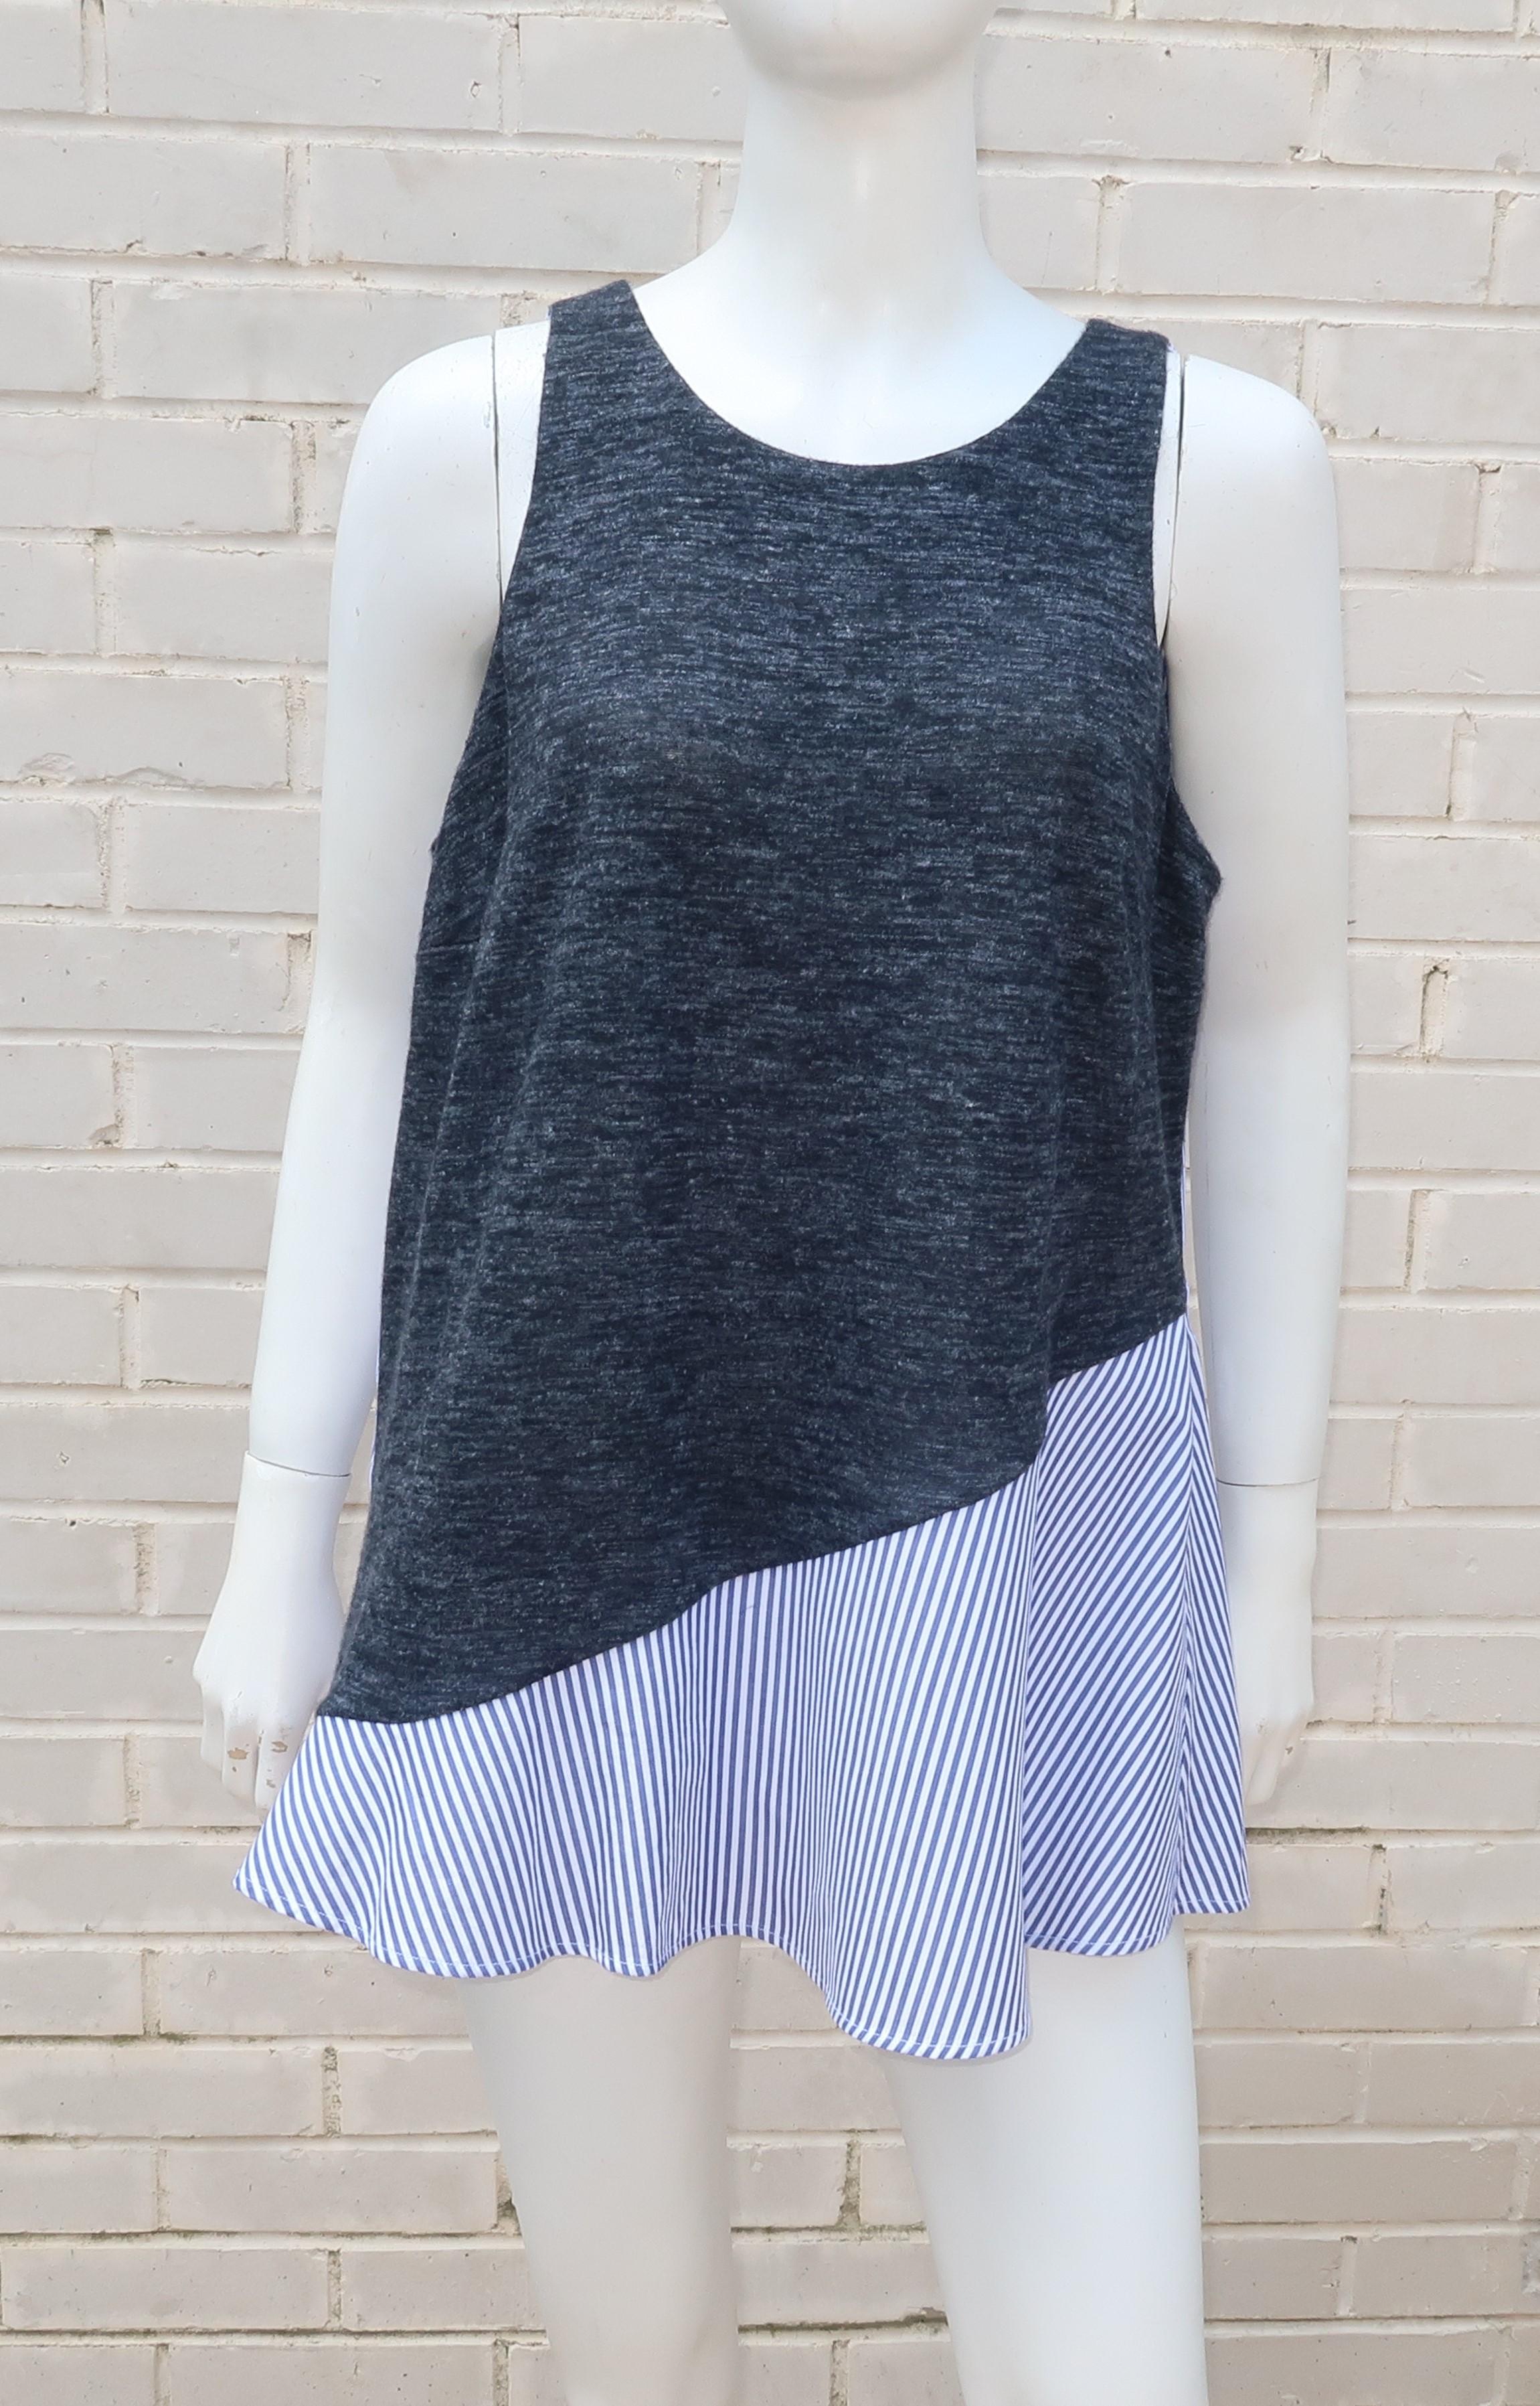 Comfortable, casual and clever ... this Thakoon Addition top has it all!  Thai-American designer, Thakoon Panichgul, has created a fun top that mixes a traditional blue and white cotton fabric with a charcoal gray knit for an innovative design that